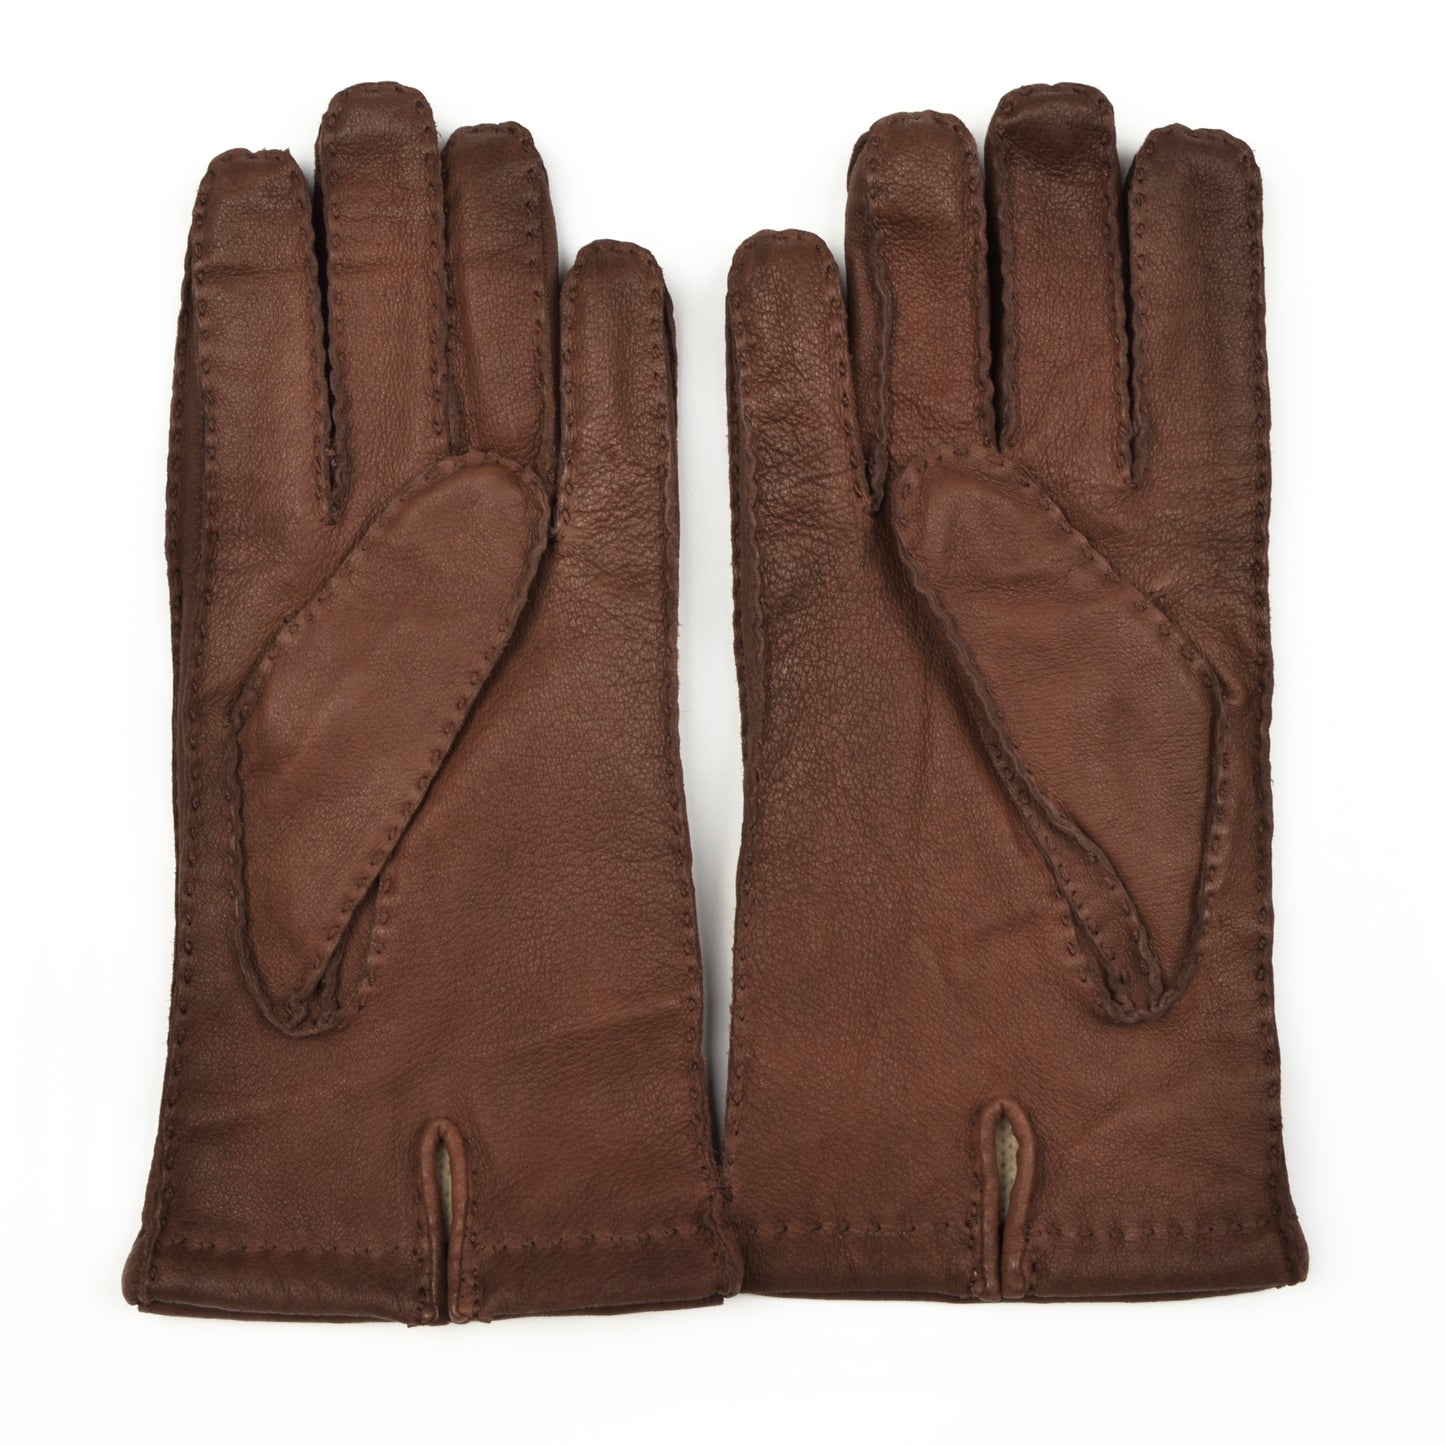 Lined Hand-Stitched Leather Gloves Size M - Brown